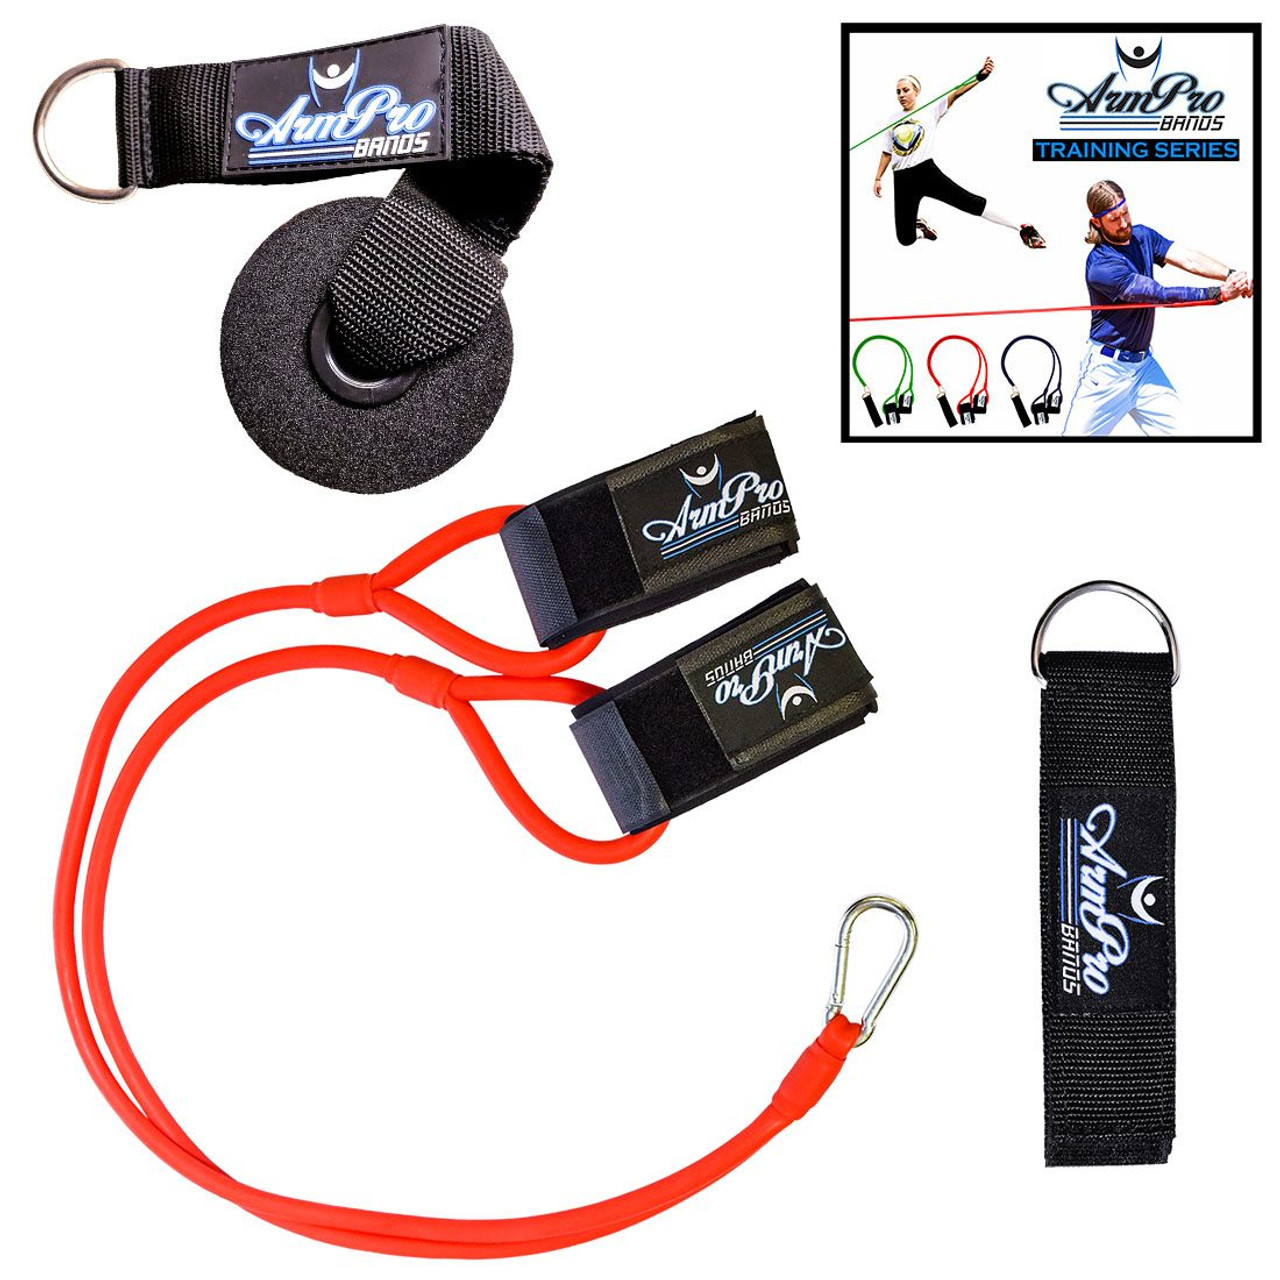 Arm Pro Softball Baseball Resistance Bands for Pitching Throwing Arm  Strength